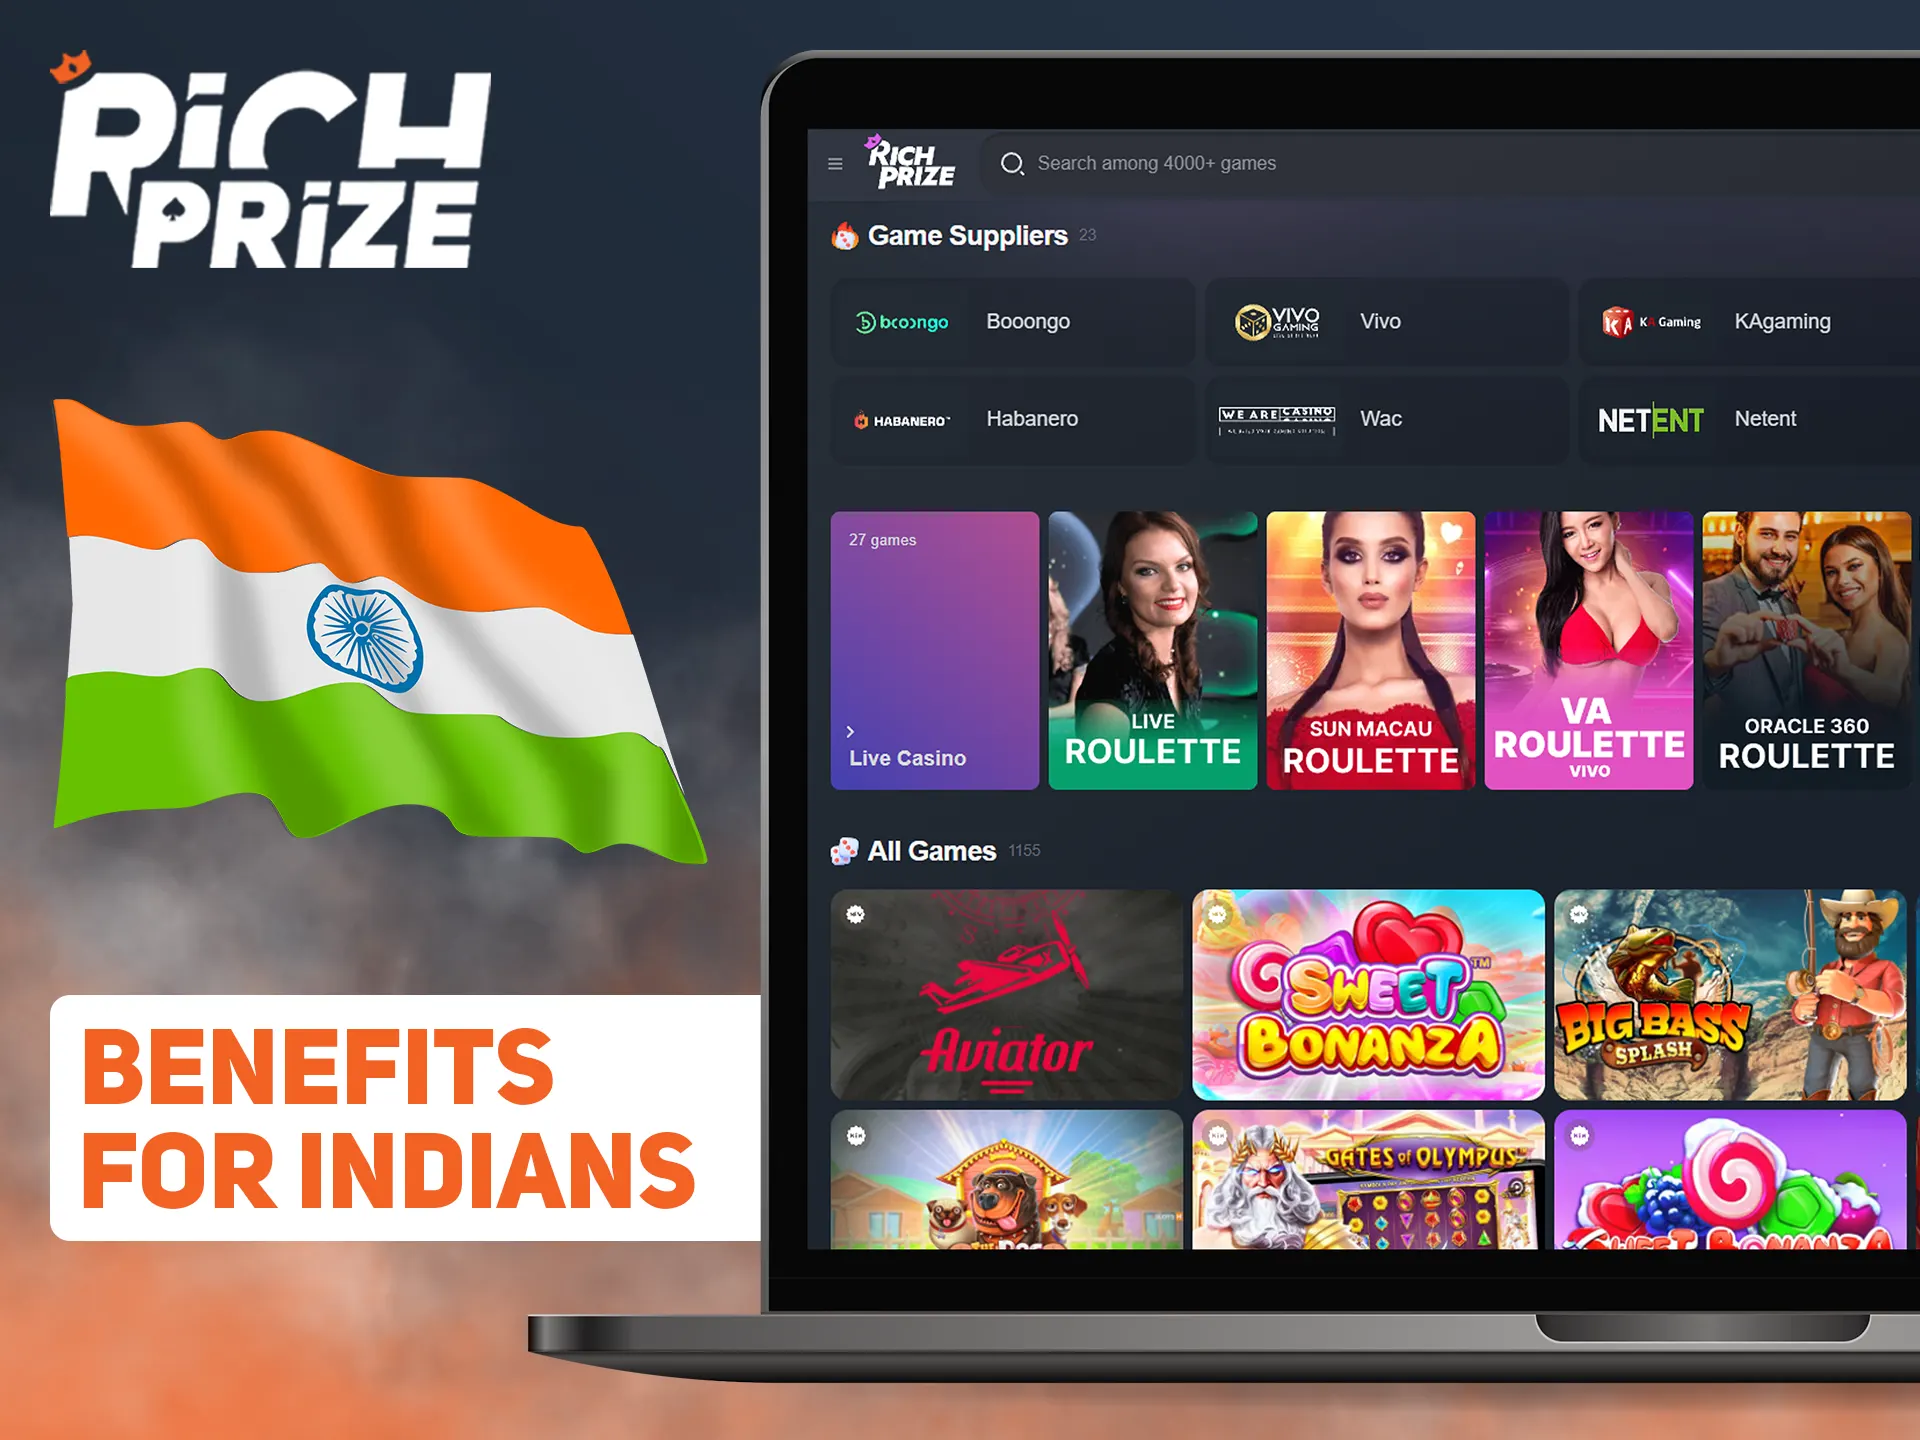 Get more value if you bet at Richprize from India.